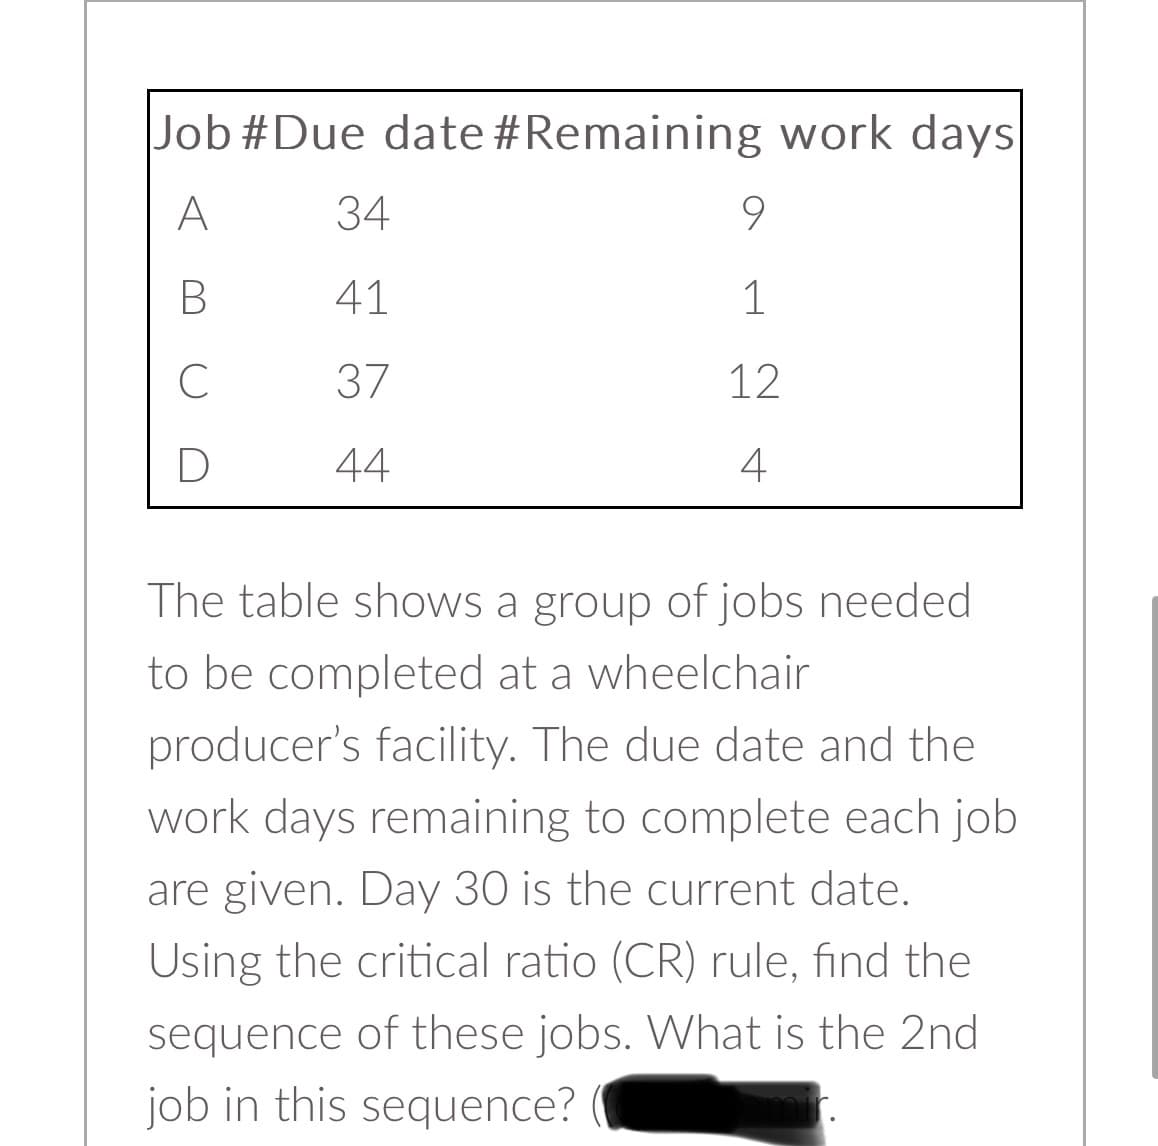 Job #Due date #Remaining work days.
A
B
C
D
34
41
37
44
9
1
12
4
The table shows a group of jobs needed
to be completed at a wheelchair
producer's facility. The due date and the
work days remaining to complete each job
are given. Day 30 is the current date.
Using the critical ratio (CR) rule, find the
sequence of these jobs. What is the 2nd
job in this sequence?